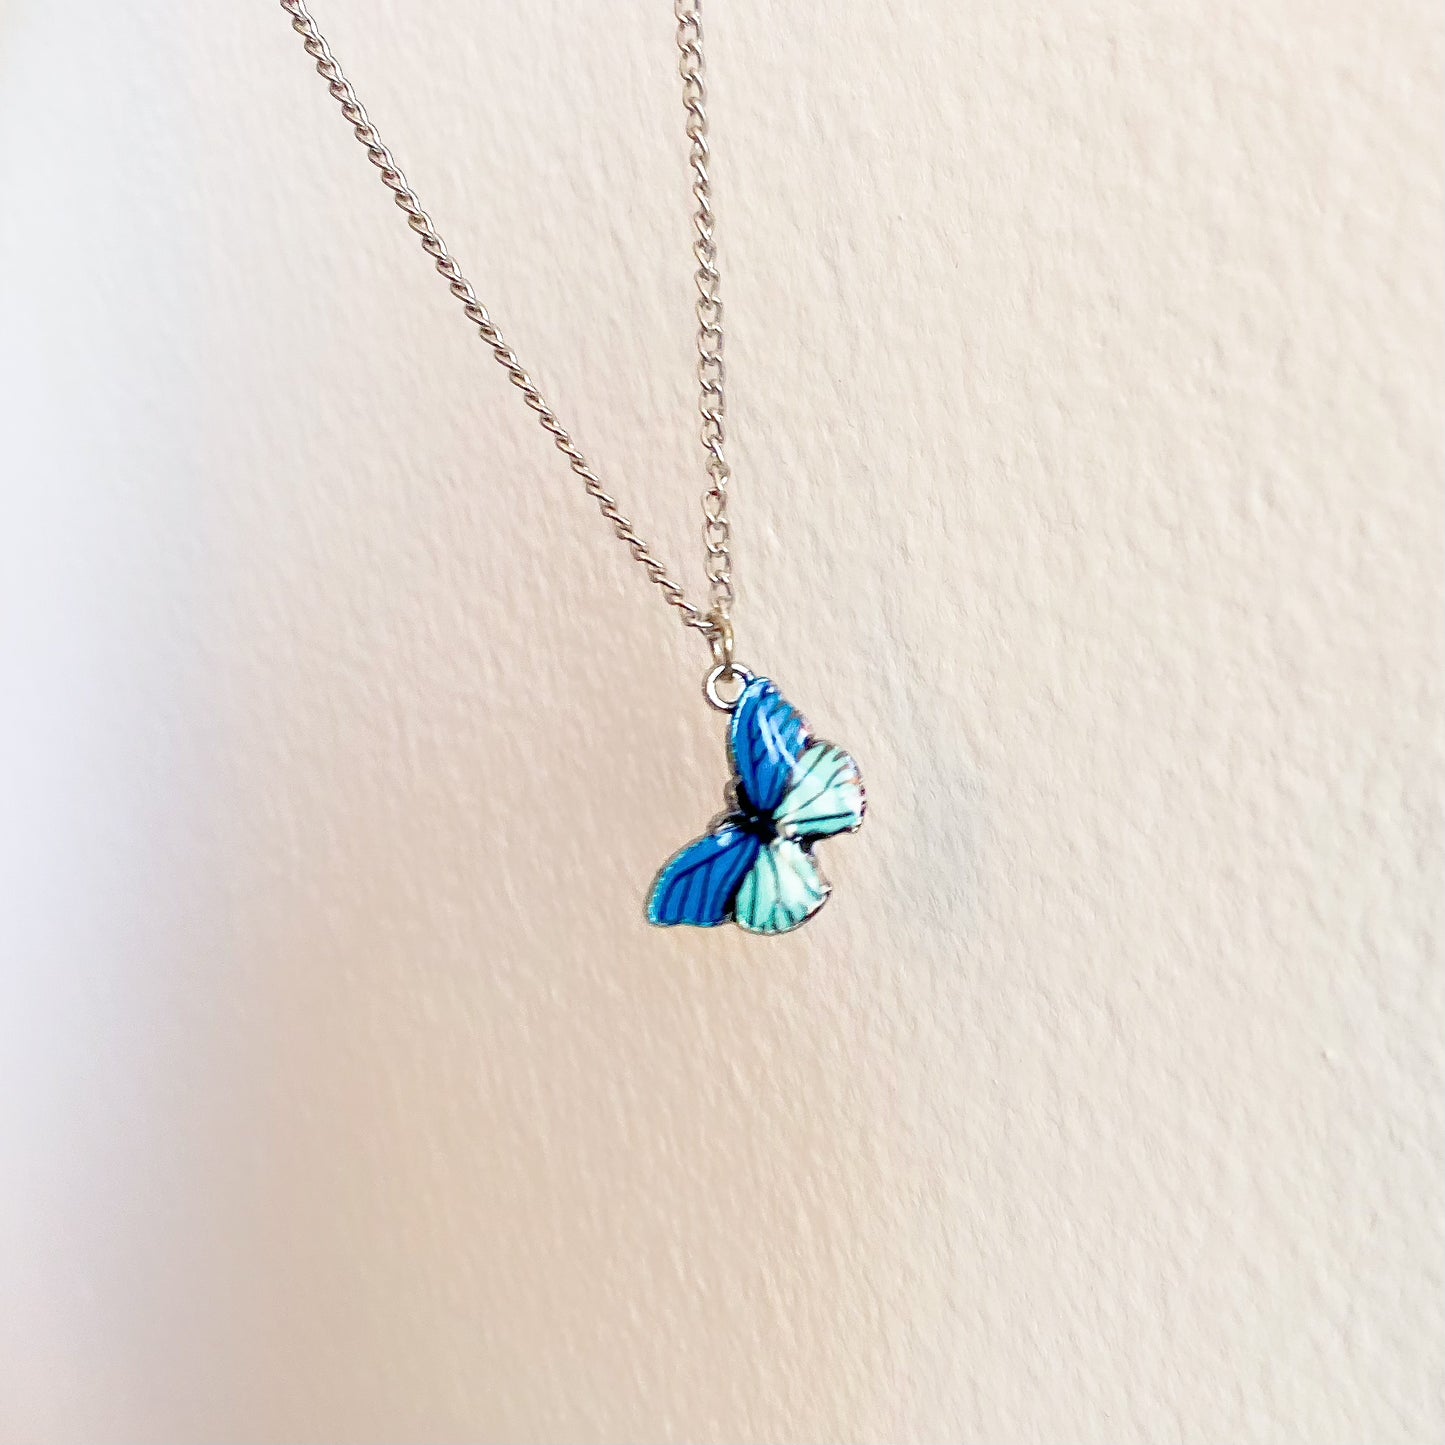 Make A Wish Butterfly Pendant Necklace